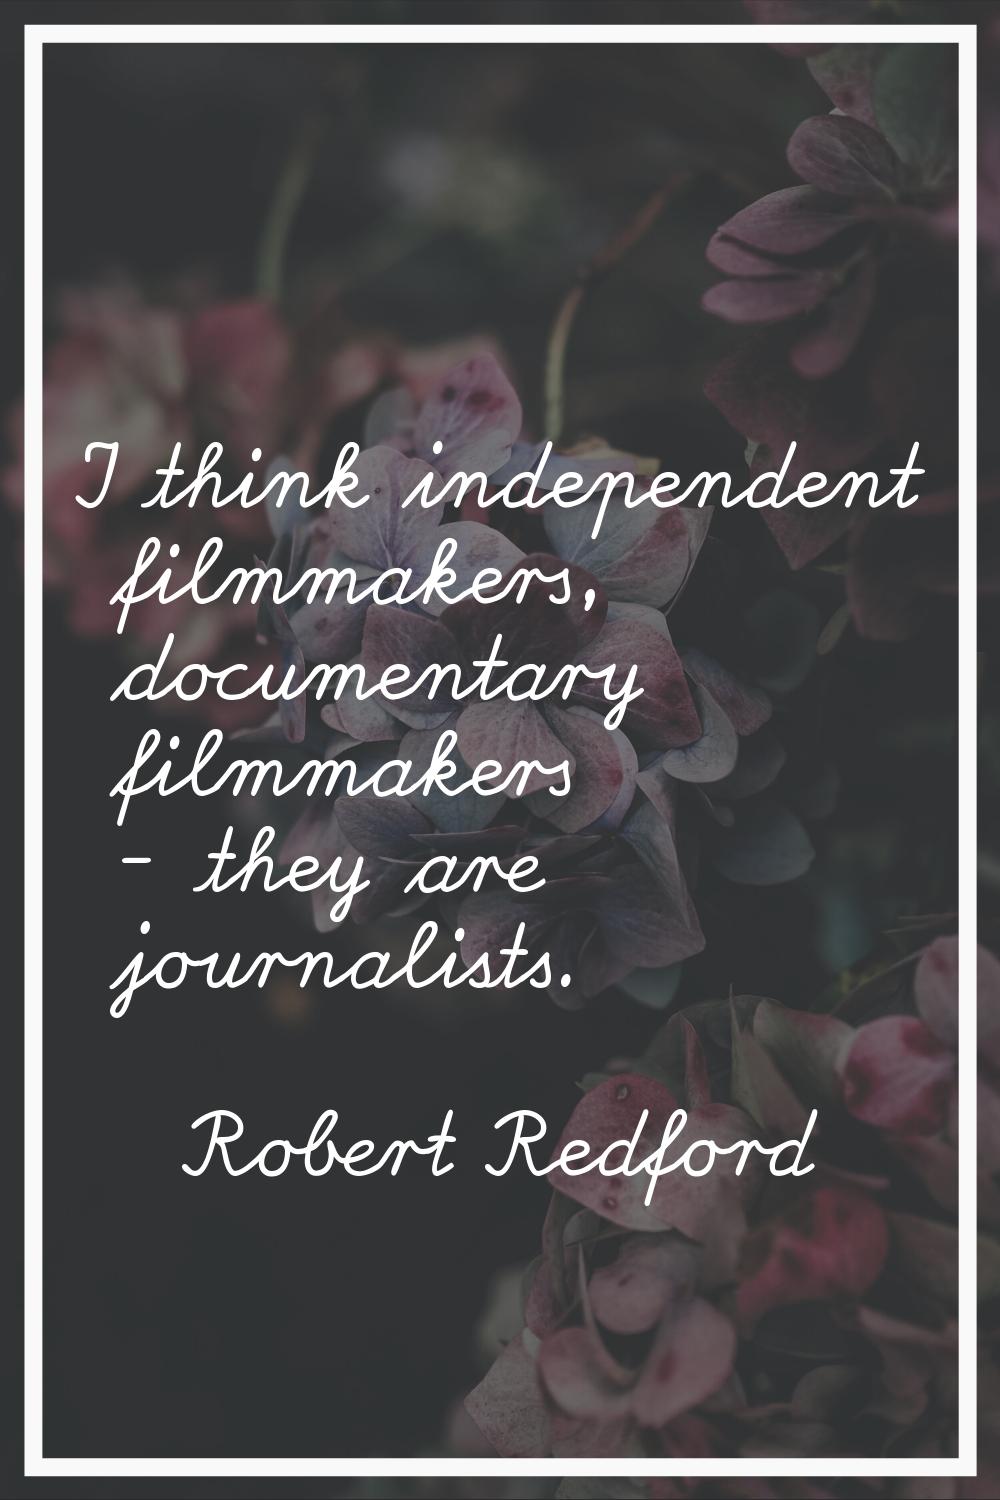 I think independent filmmakers, documentary filmmakers - they are journalists.